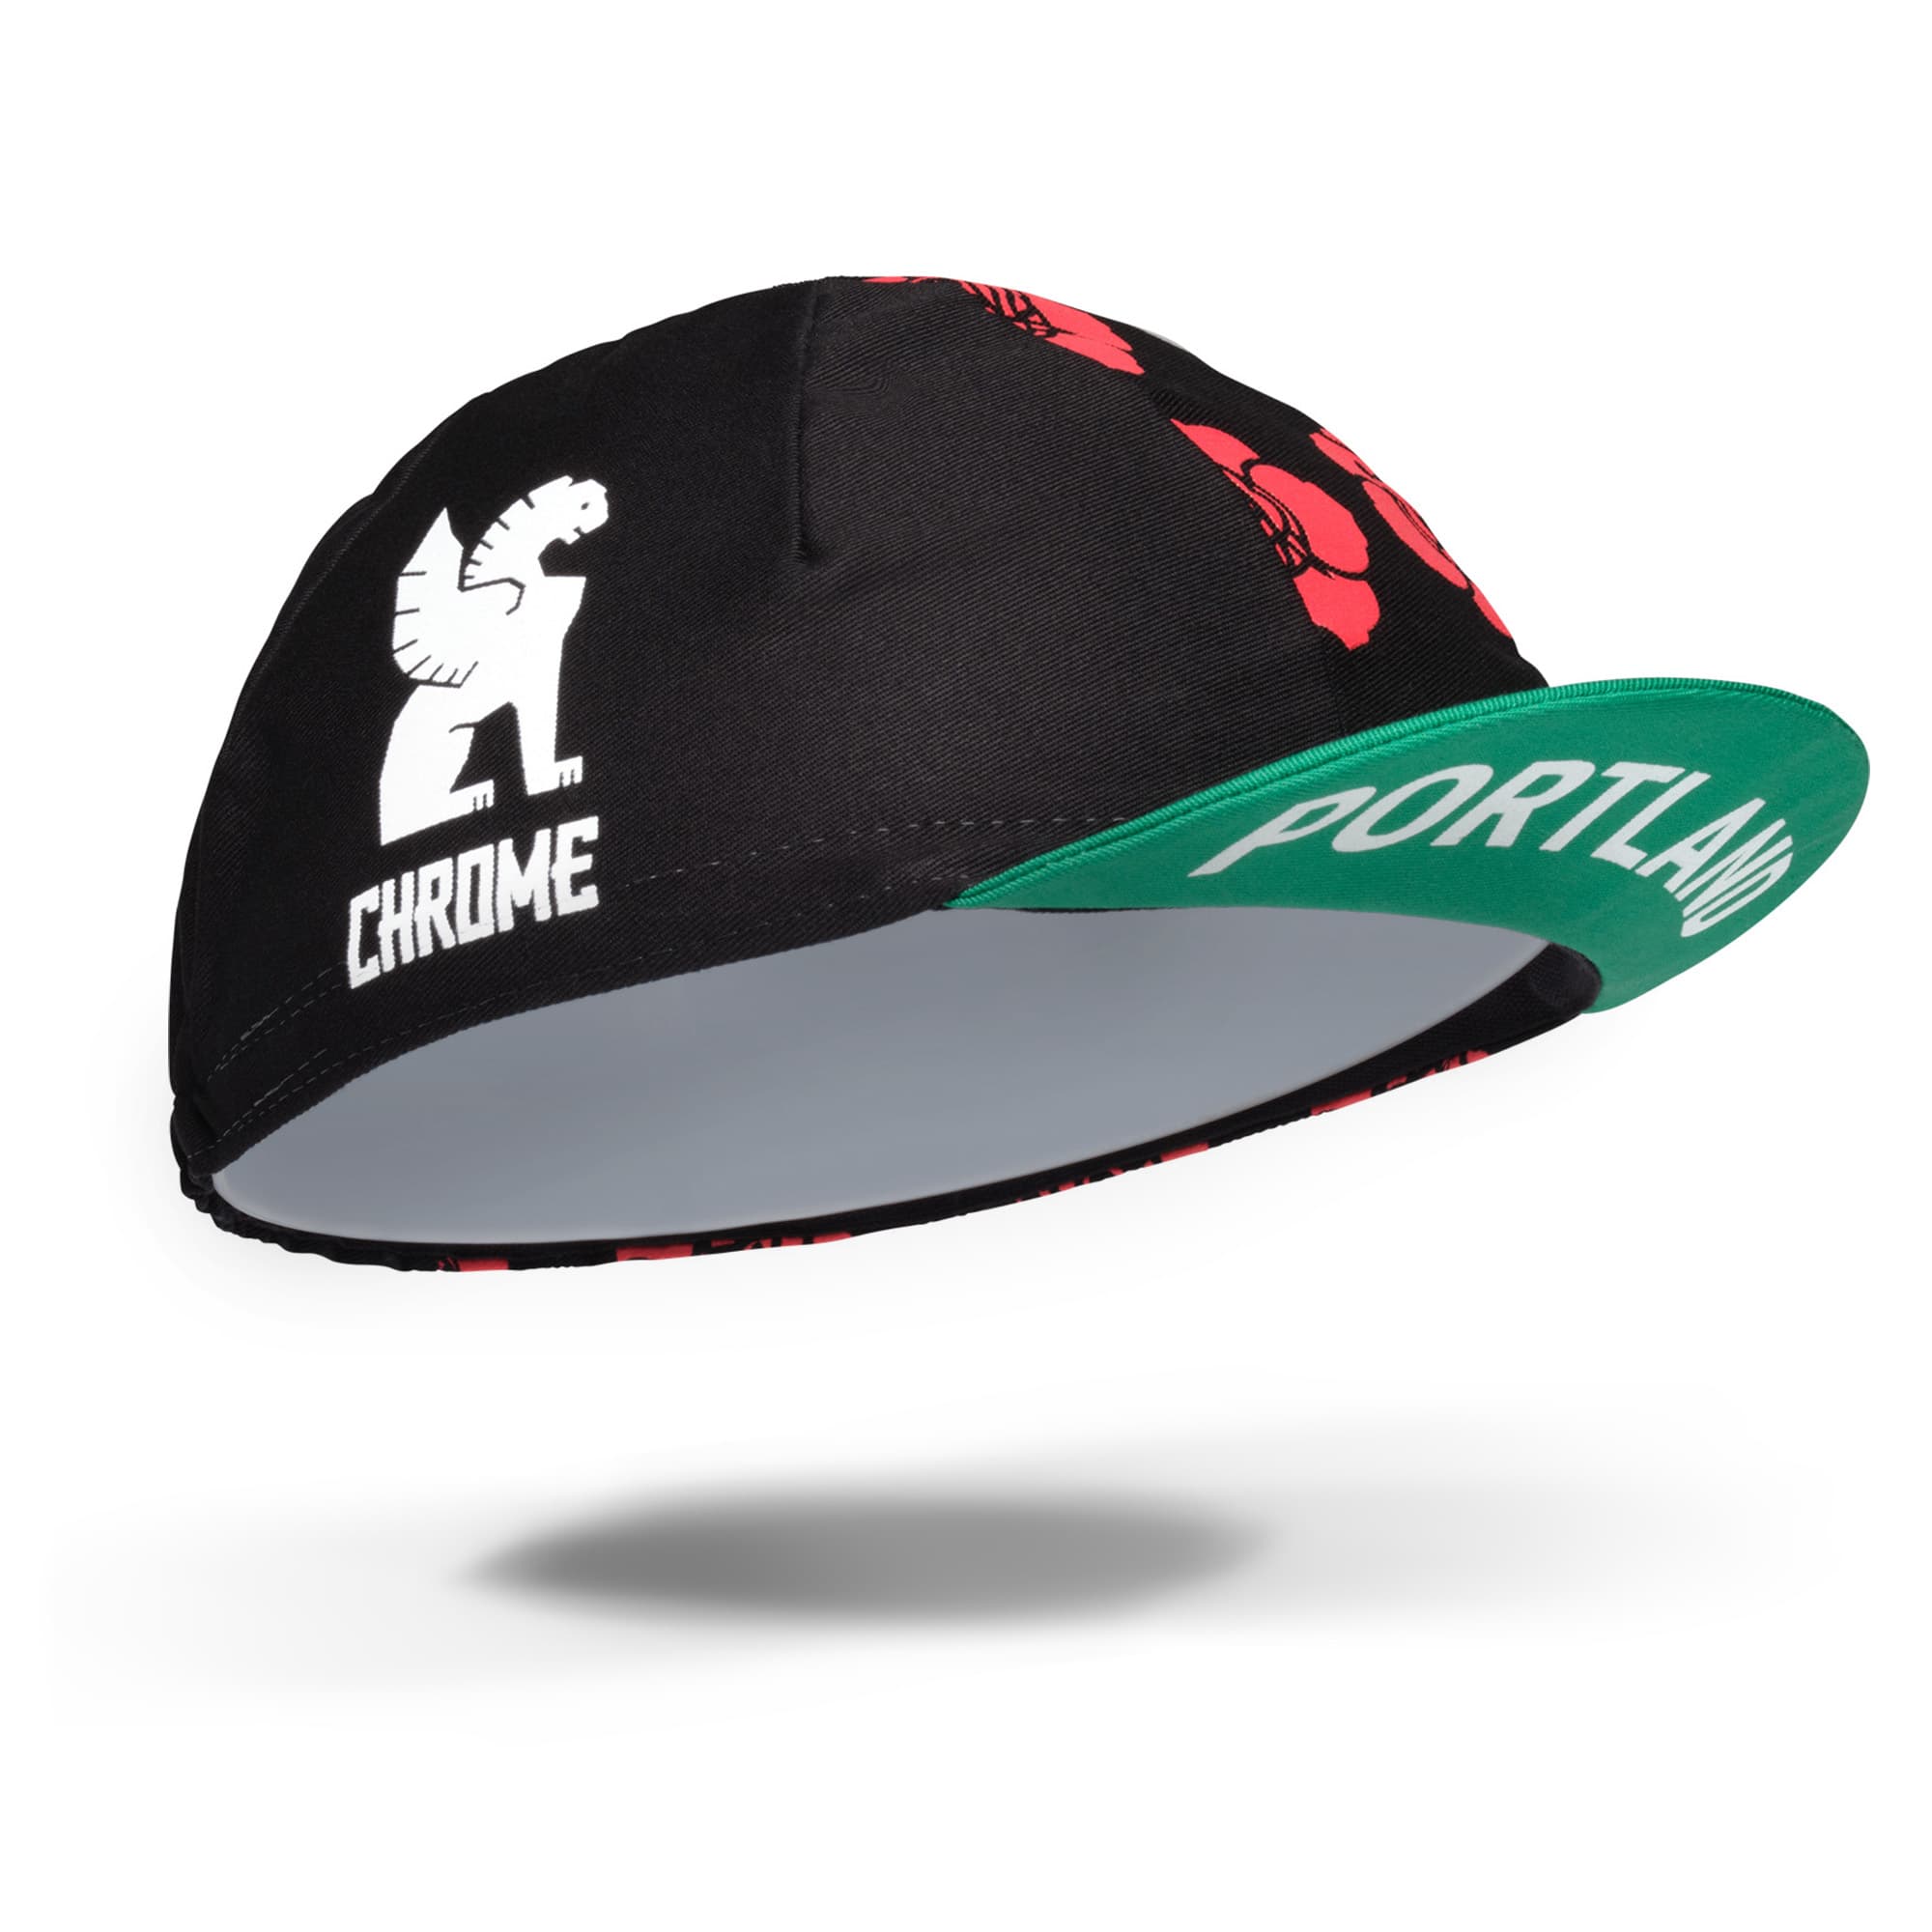 Chrome Portland Rides Cycling Cap in black #color_portland roses